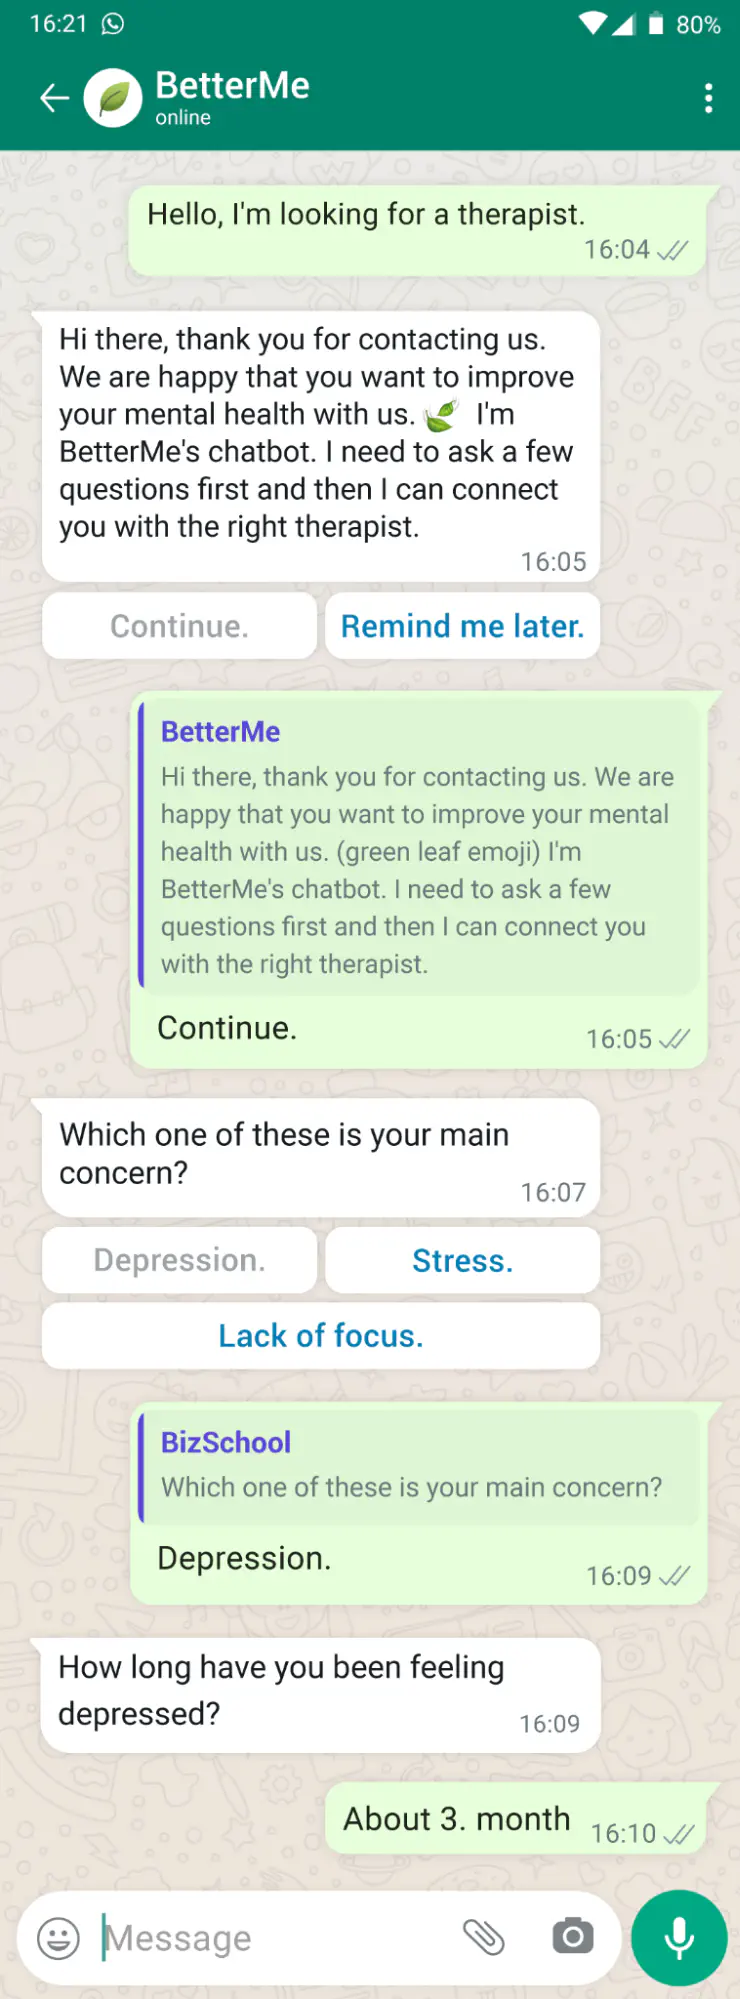 WhatsApp conversation with a patient.